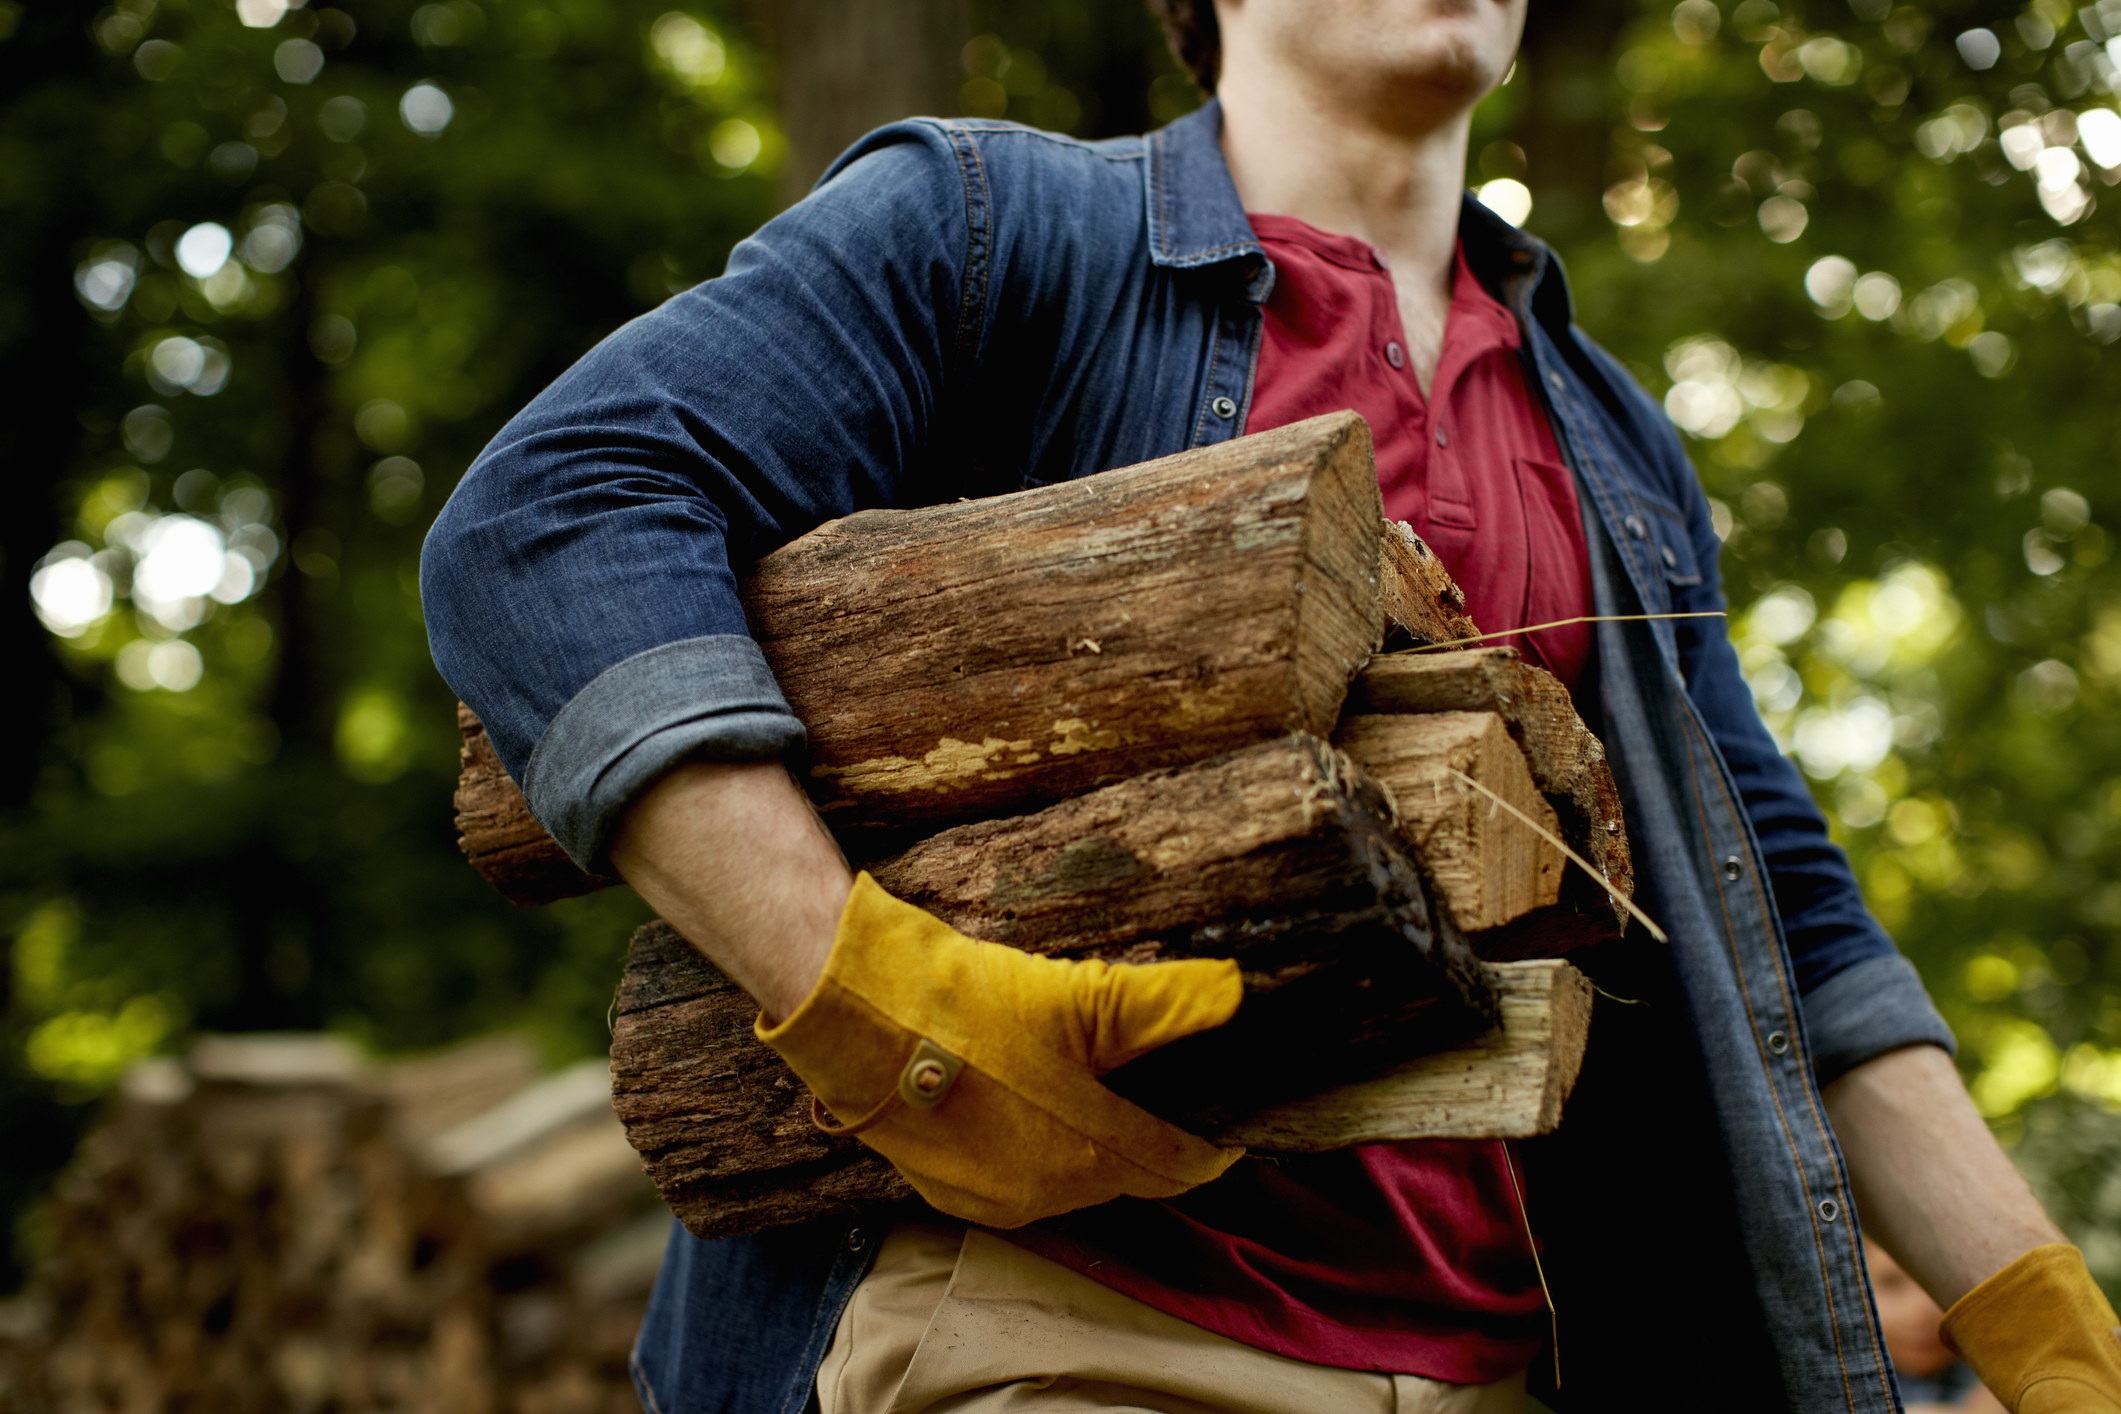 A person holding firewood